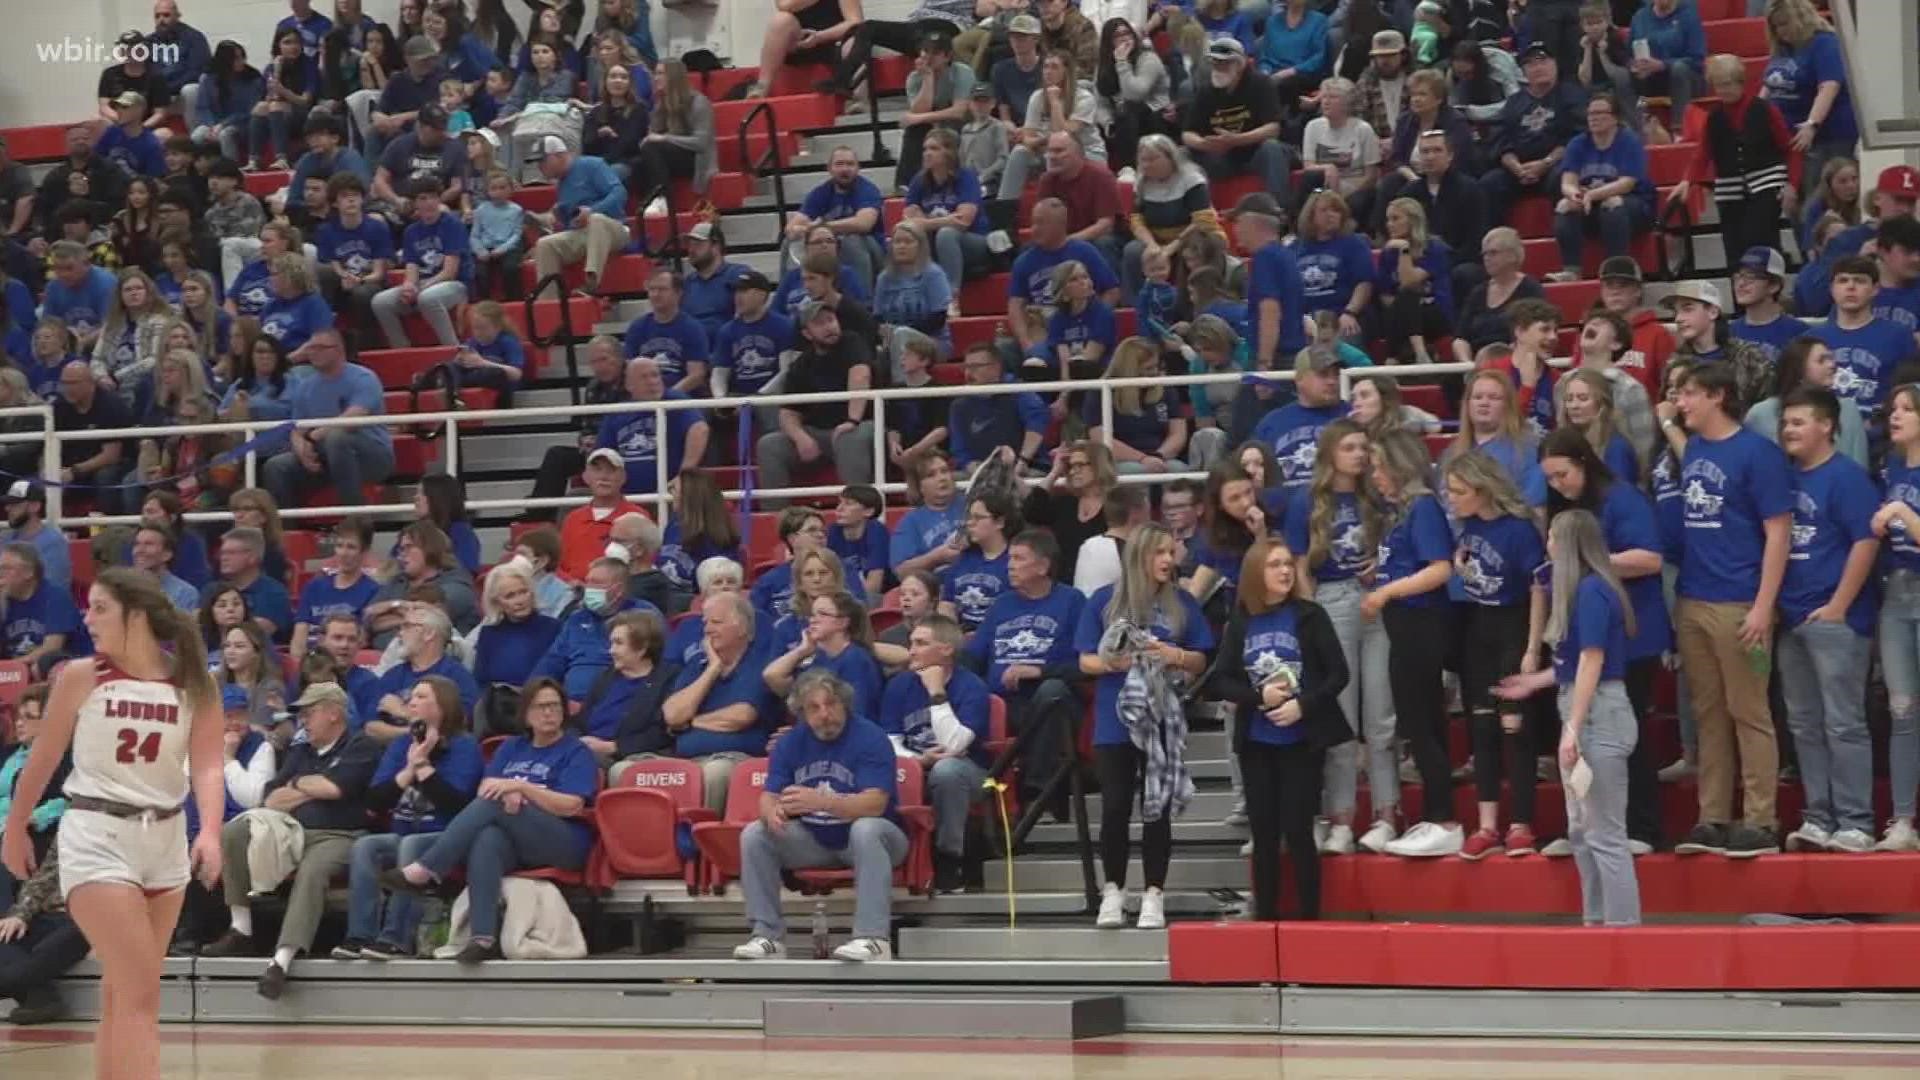 Both teams wore blue during a basketball game to honor the memory of a fallen Loudon County deputy.